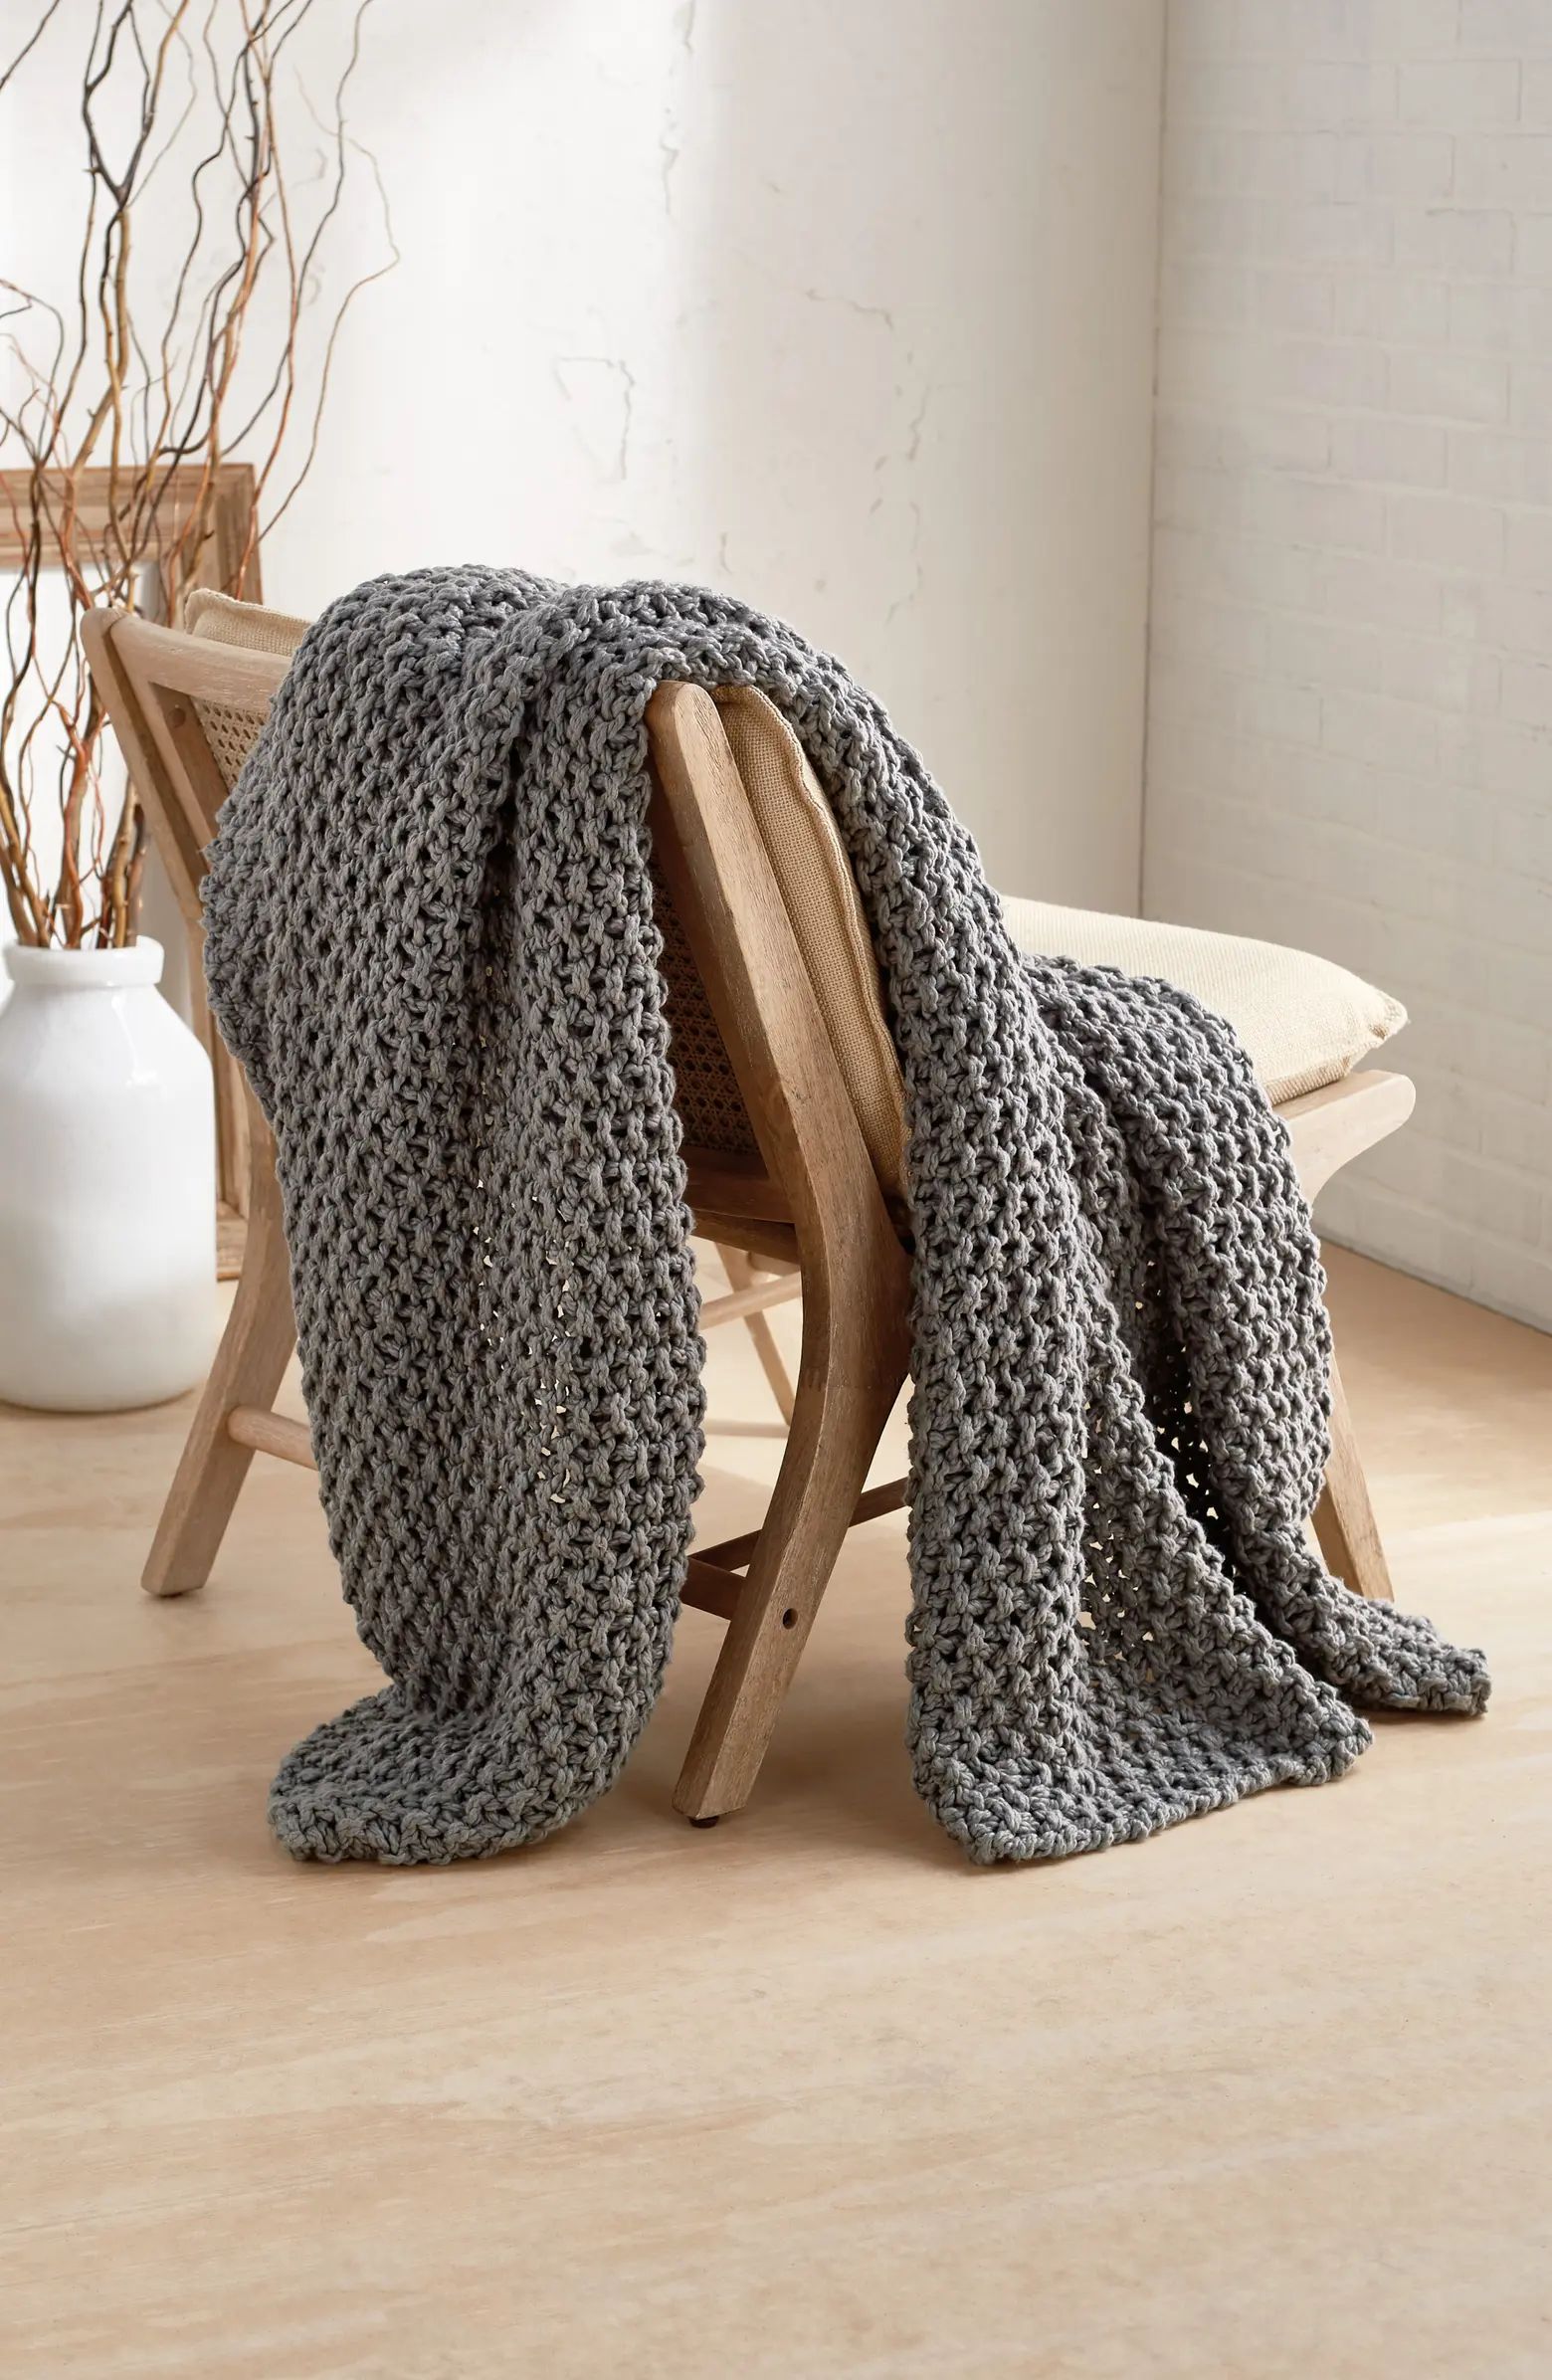 PURE Chunky Knit Throw Blanket | Nordstrom